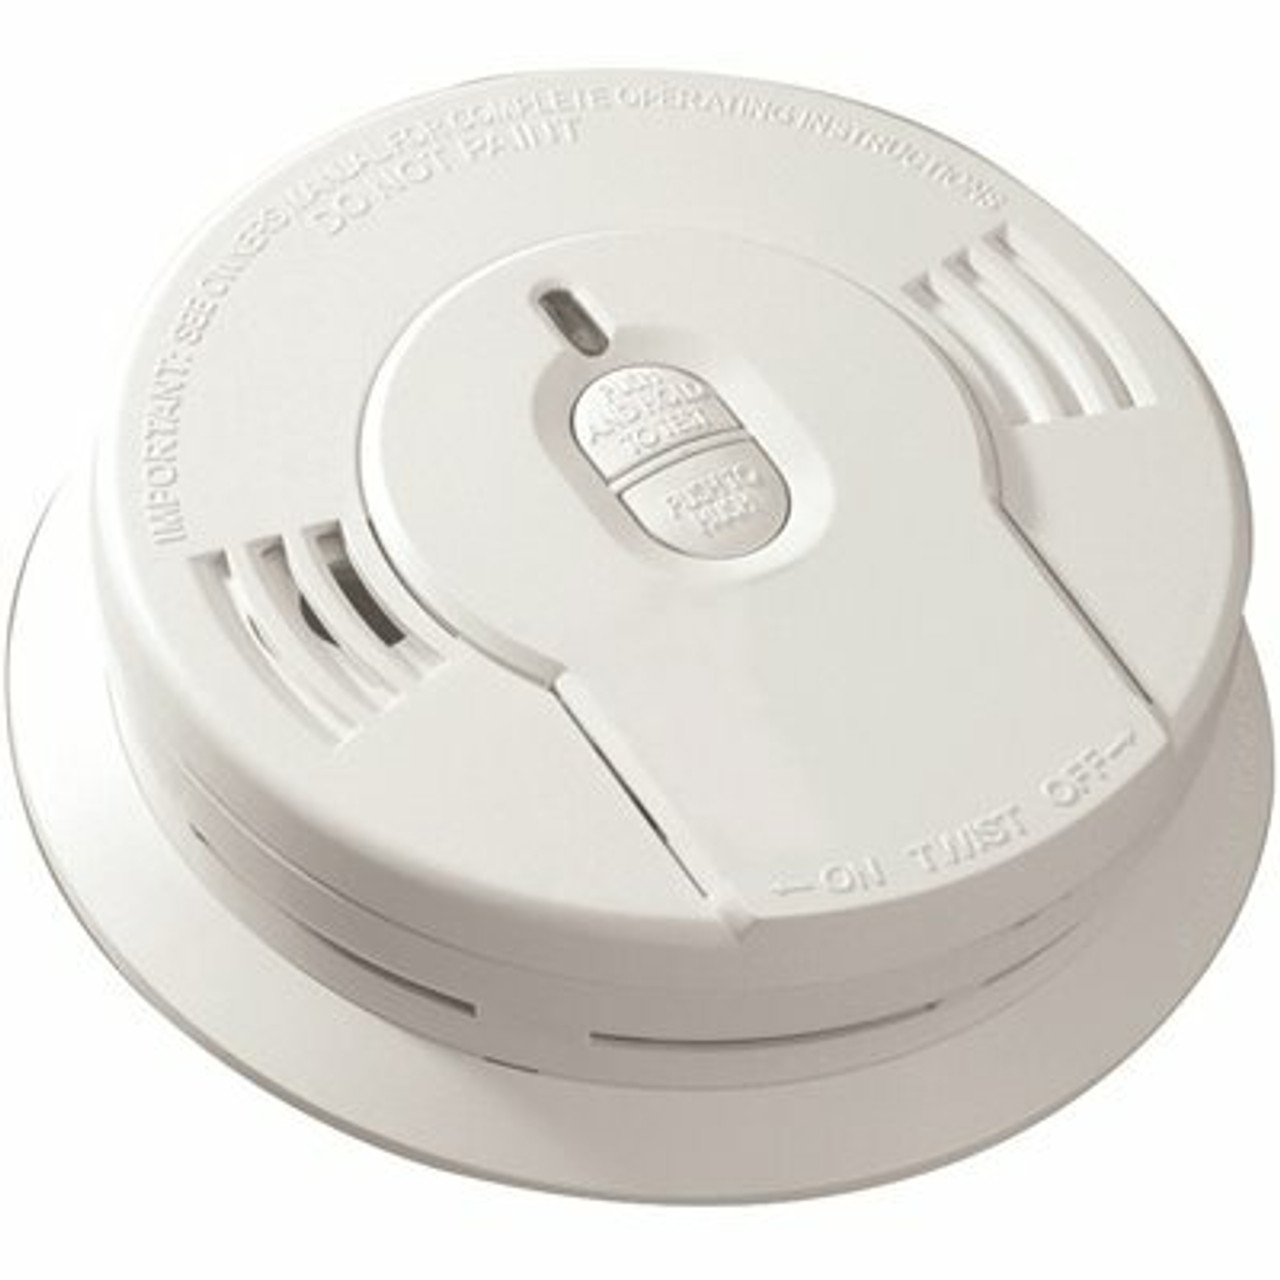 Sentinel Sentinel 10 Year Worry-Free Sealed Battery Smoke Detector With Ionization Sensor